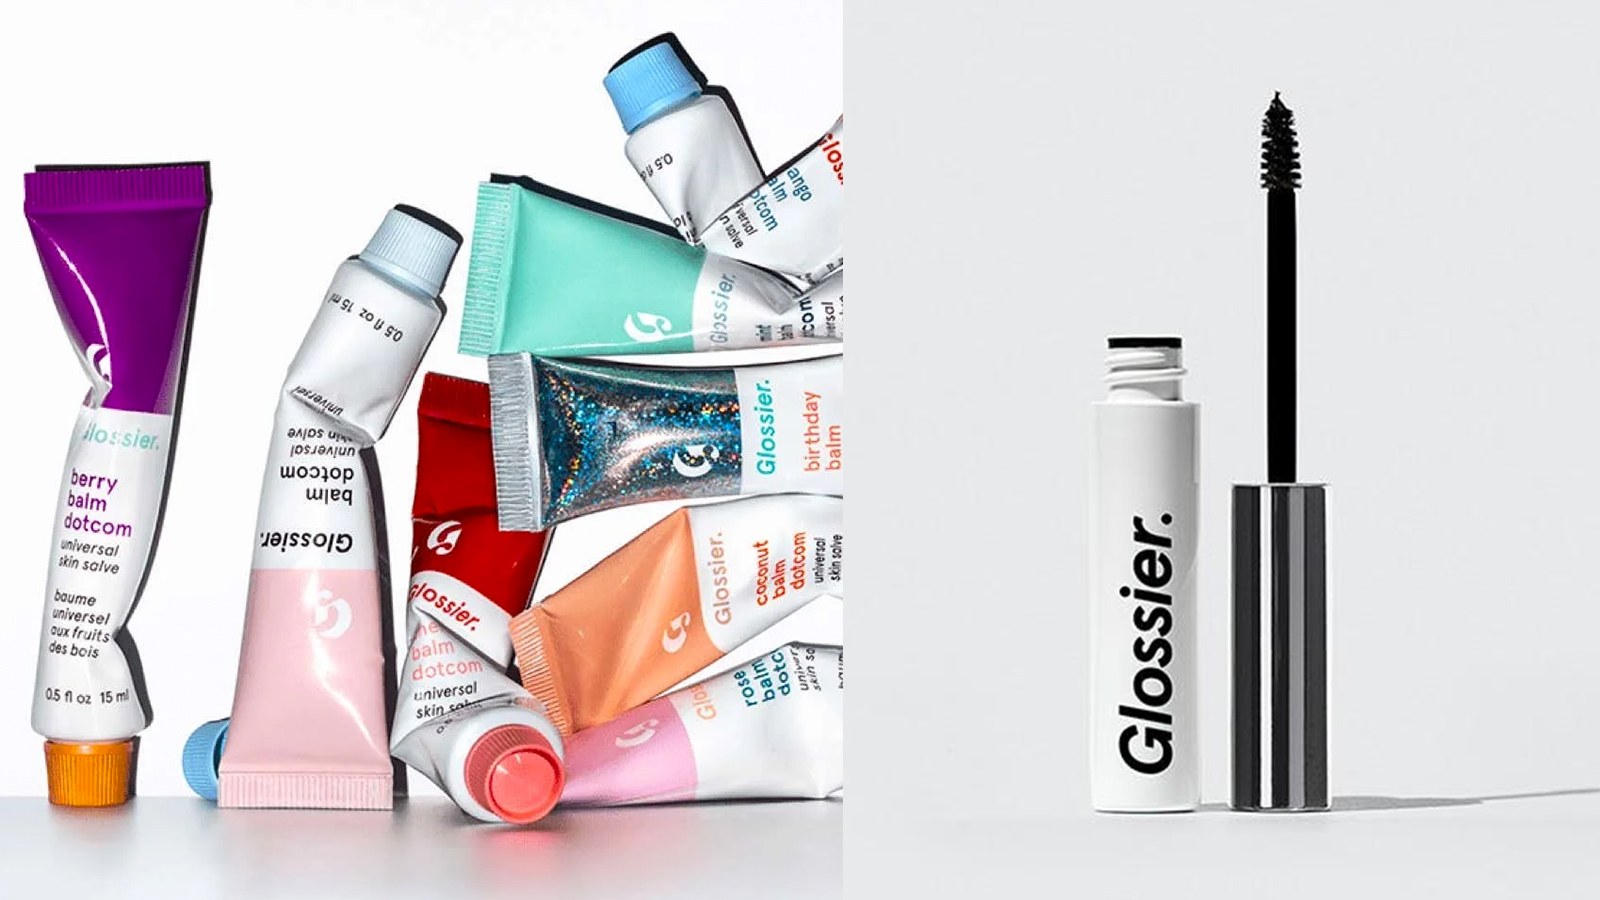 Glossier Black Friday Sale 2019: 20% Off Deals to Shop